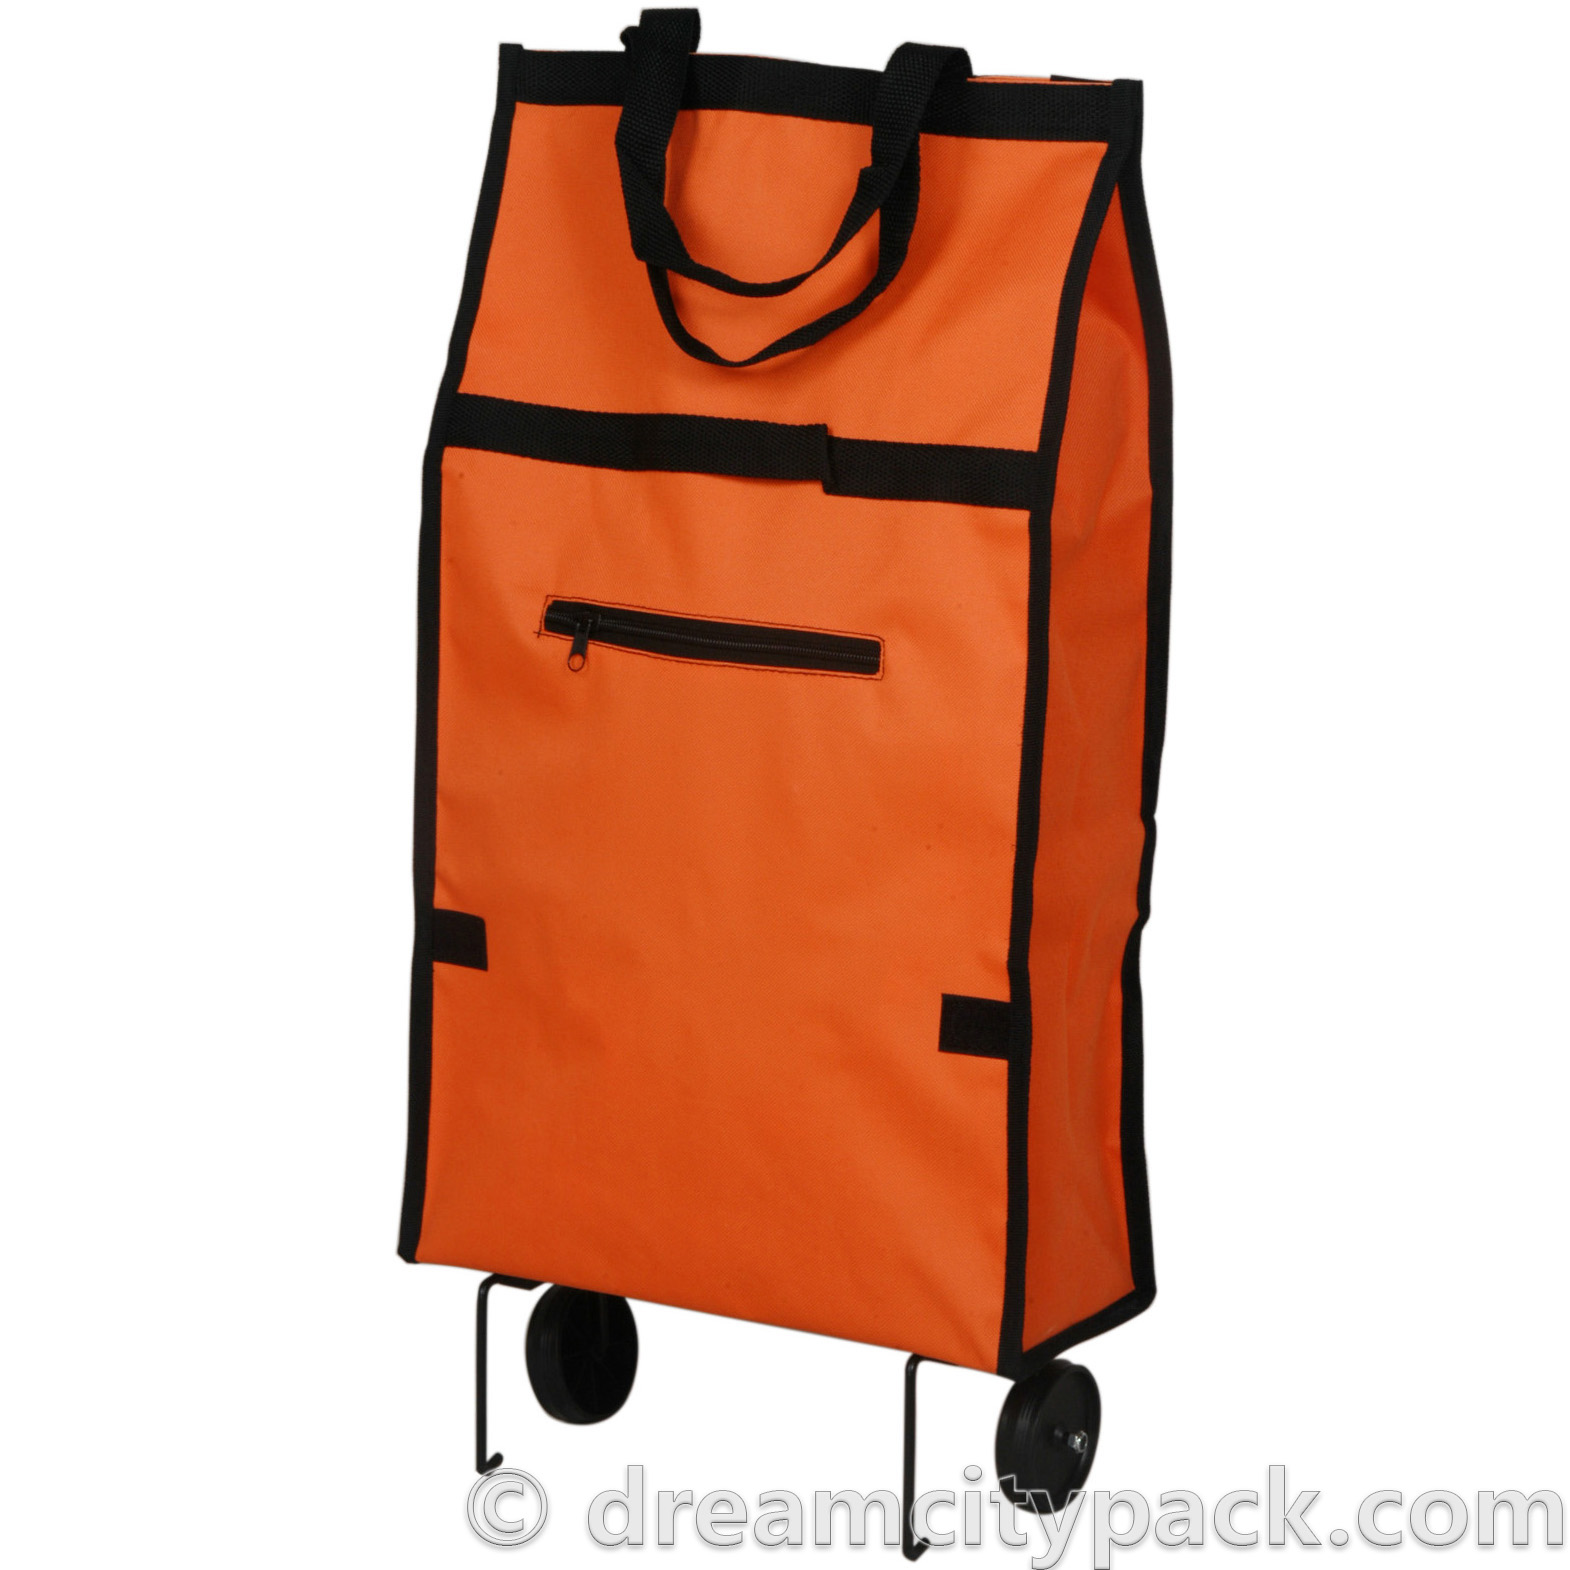 foldable trolley shopping bag for travel and vegetable plain yellow